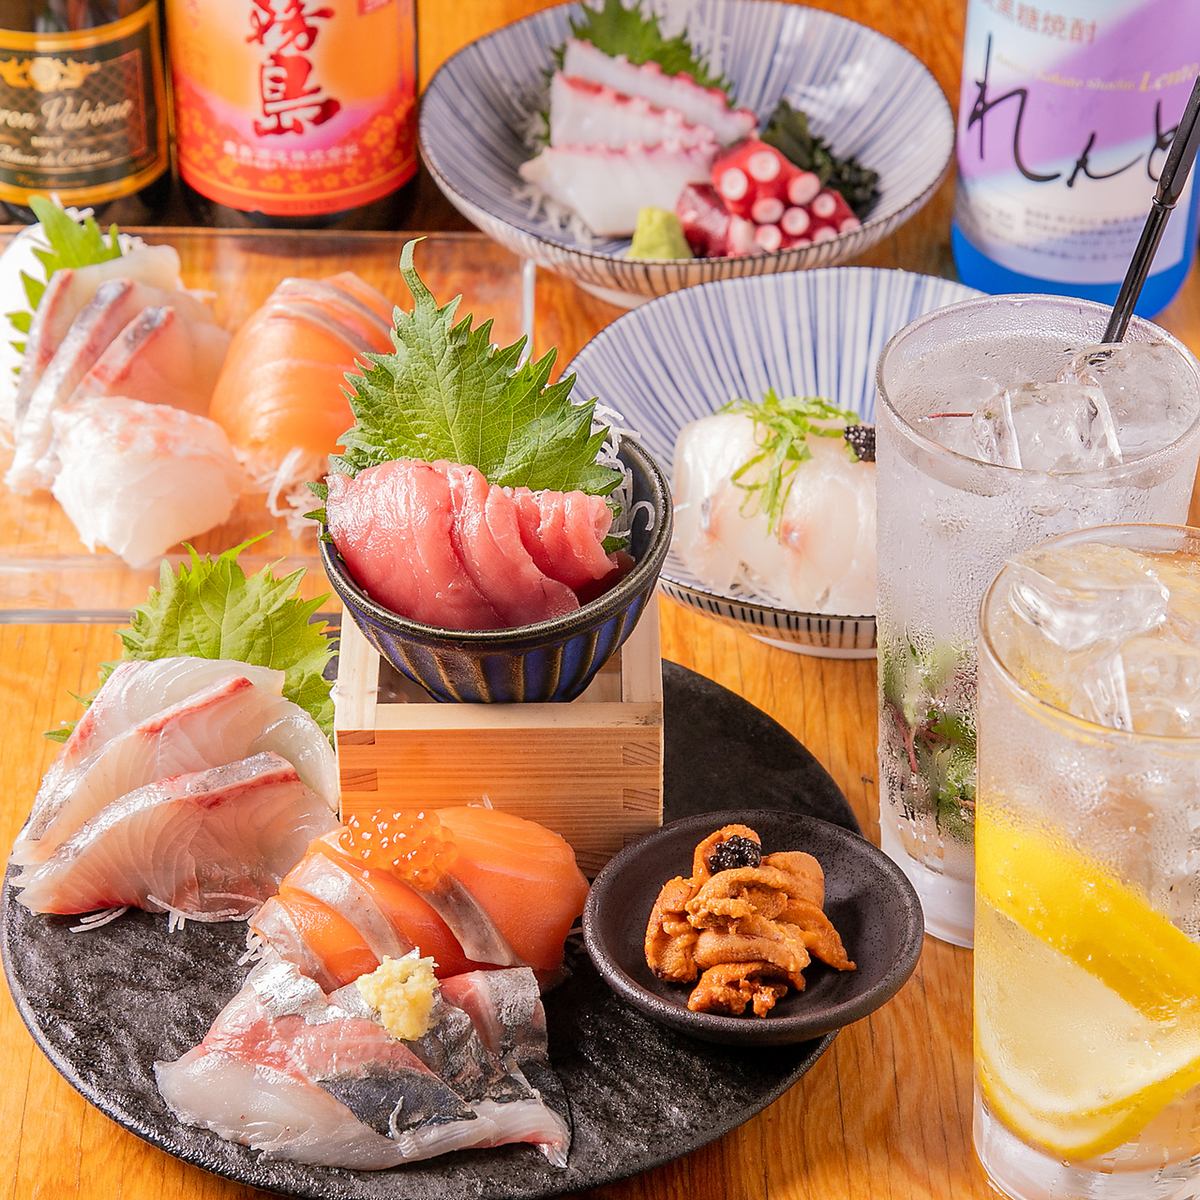 A 1-minute walk from Akitsu Station! [Sushi Izakaya Toyomaru] Open for lunch 〇 Sake and wine are also available